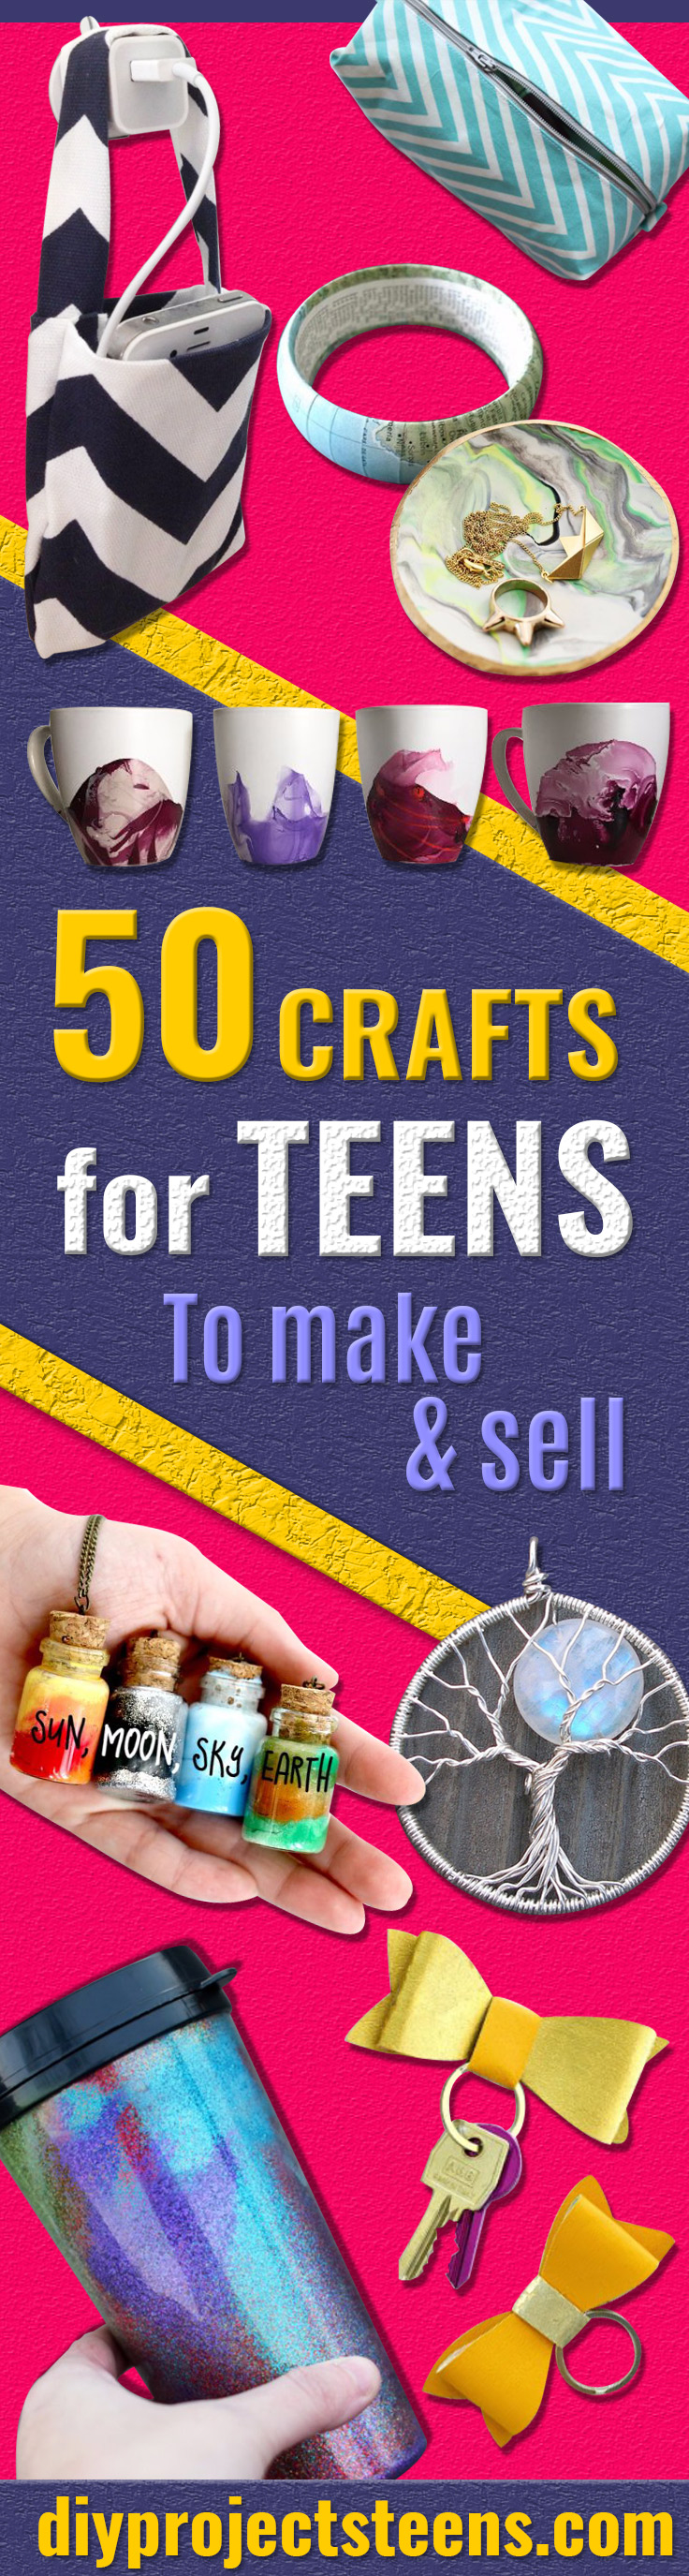 Cool Crafts for Teens to Make and Sell - Creative DIY Projects to Make and Sell - DIY Ideas to Sell for Most Profitable Crafts for Etsy